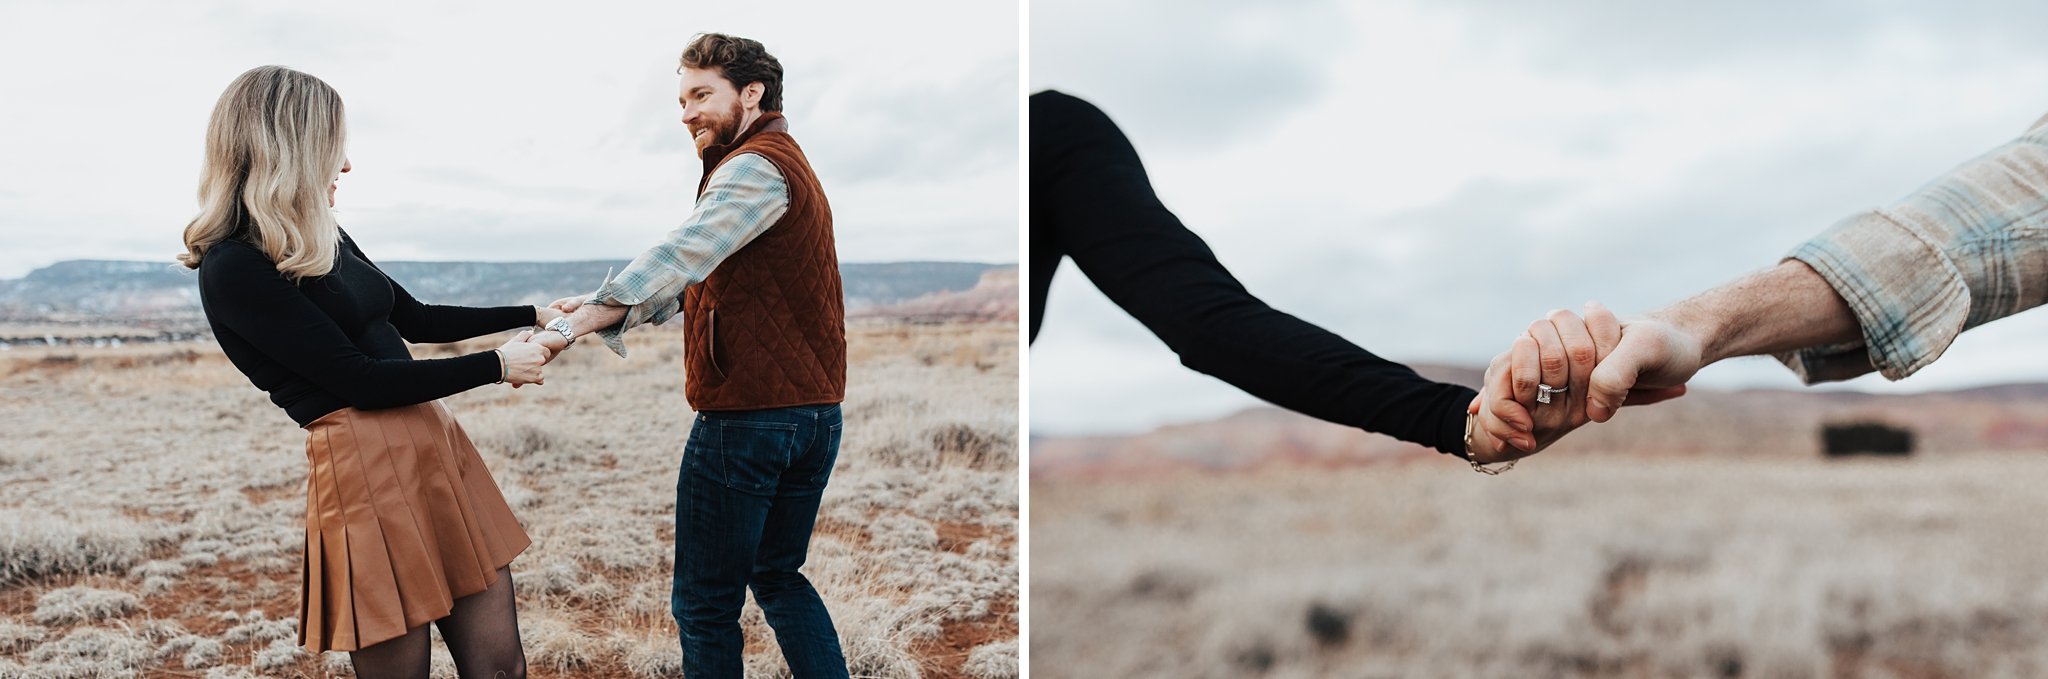 Alicia+lucia+photography+-+albuquerque+wedding+photographer+-+santa+fe+wedding+photography+-+new+mexico+wedding+photographer+-+new+mexico+wedding+-+southwest+engagement+-+ghost+ranch+engagement+-+ghost+ranch+wedding_0098.jpg